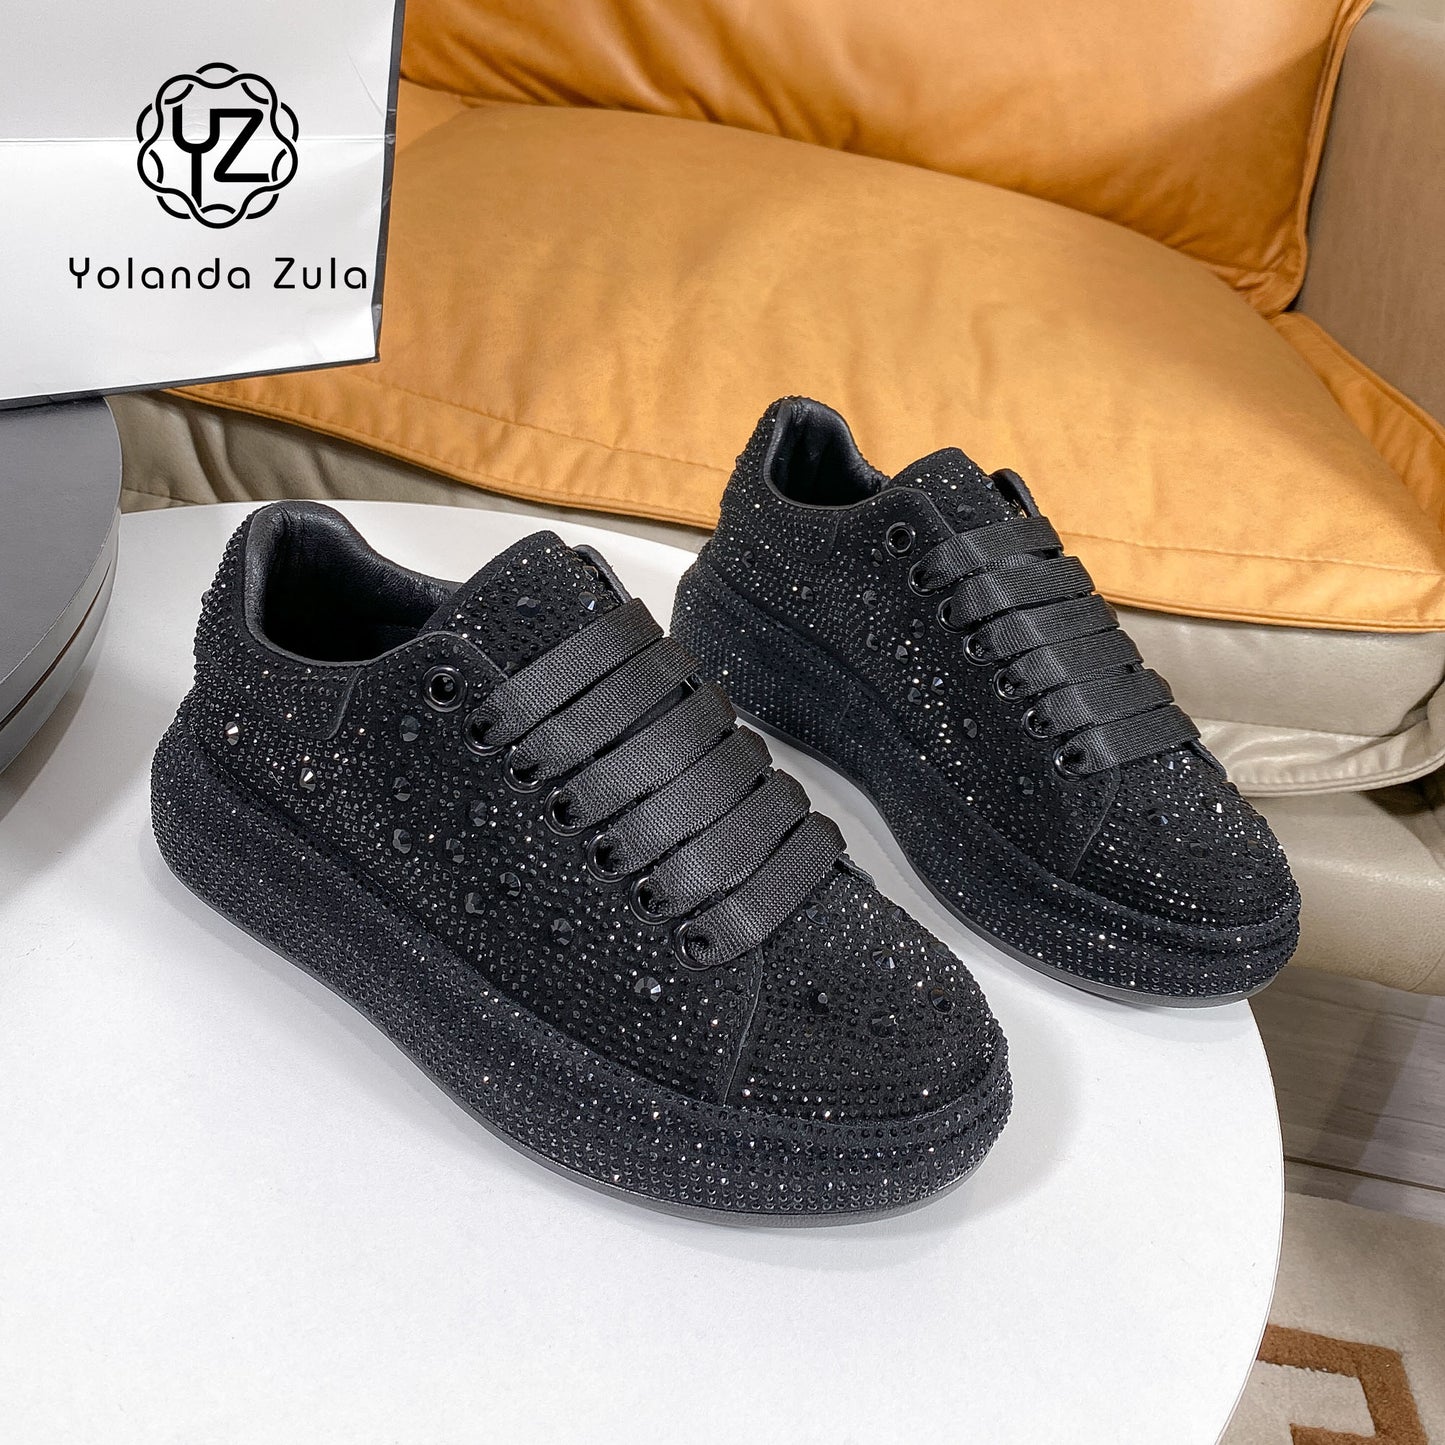 Women's thick soled high rise casual shoes